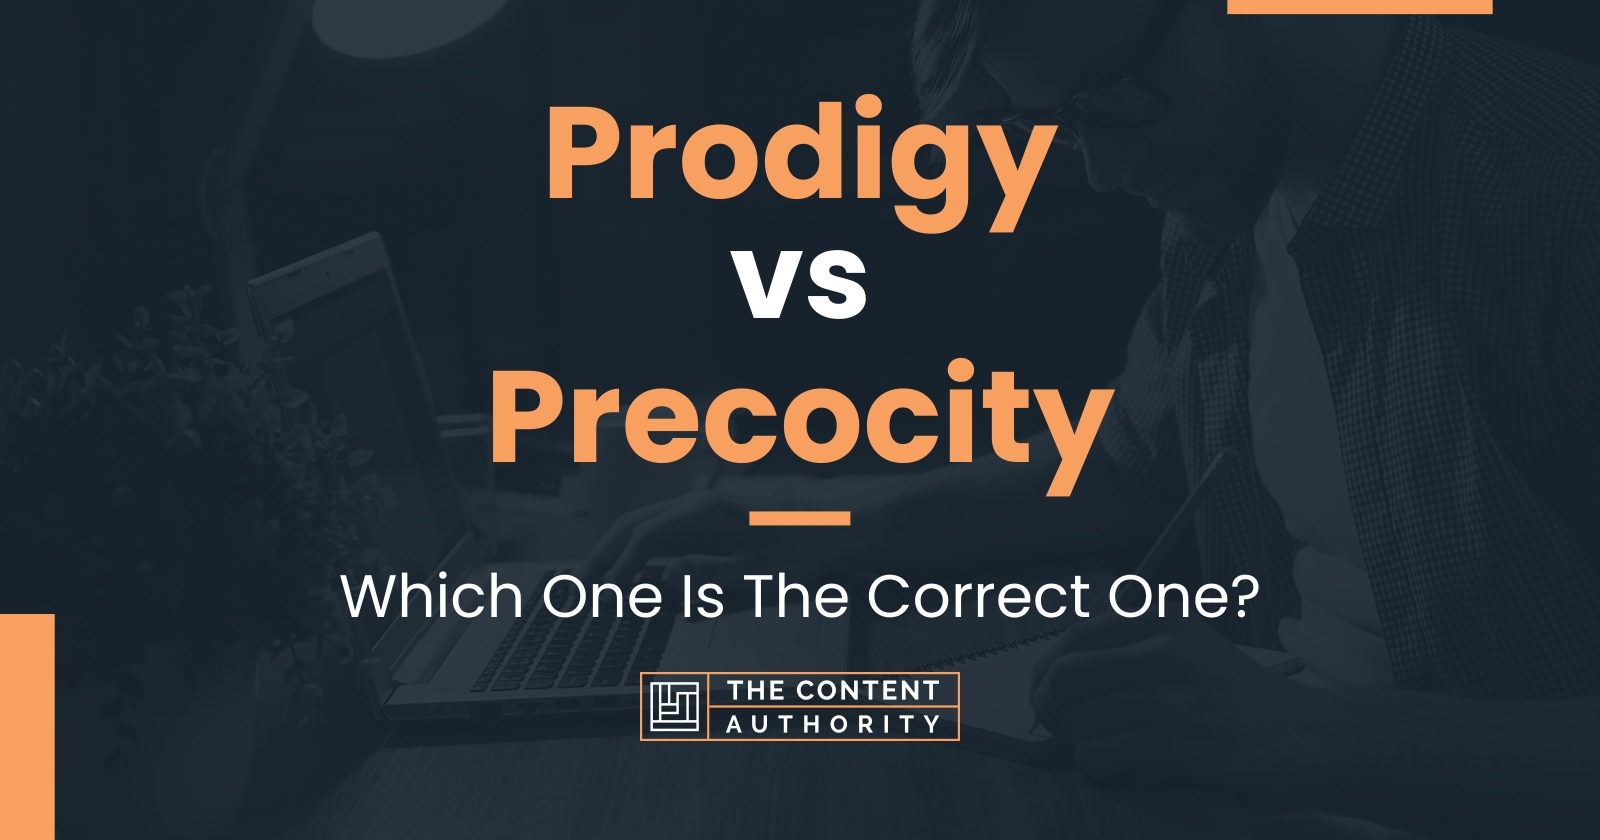 Prodigy vs Precocity: Which One Is The Correct One?